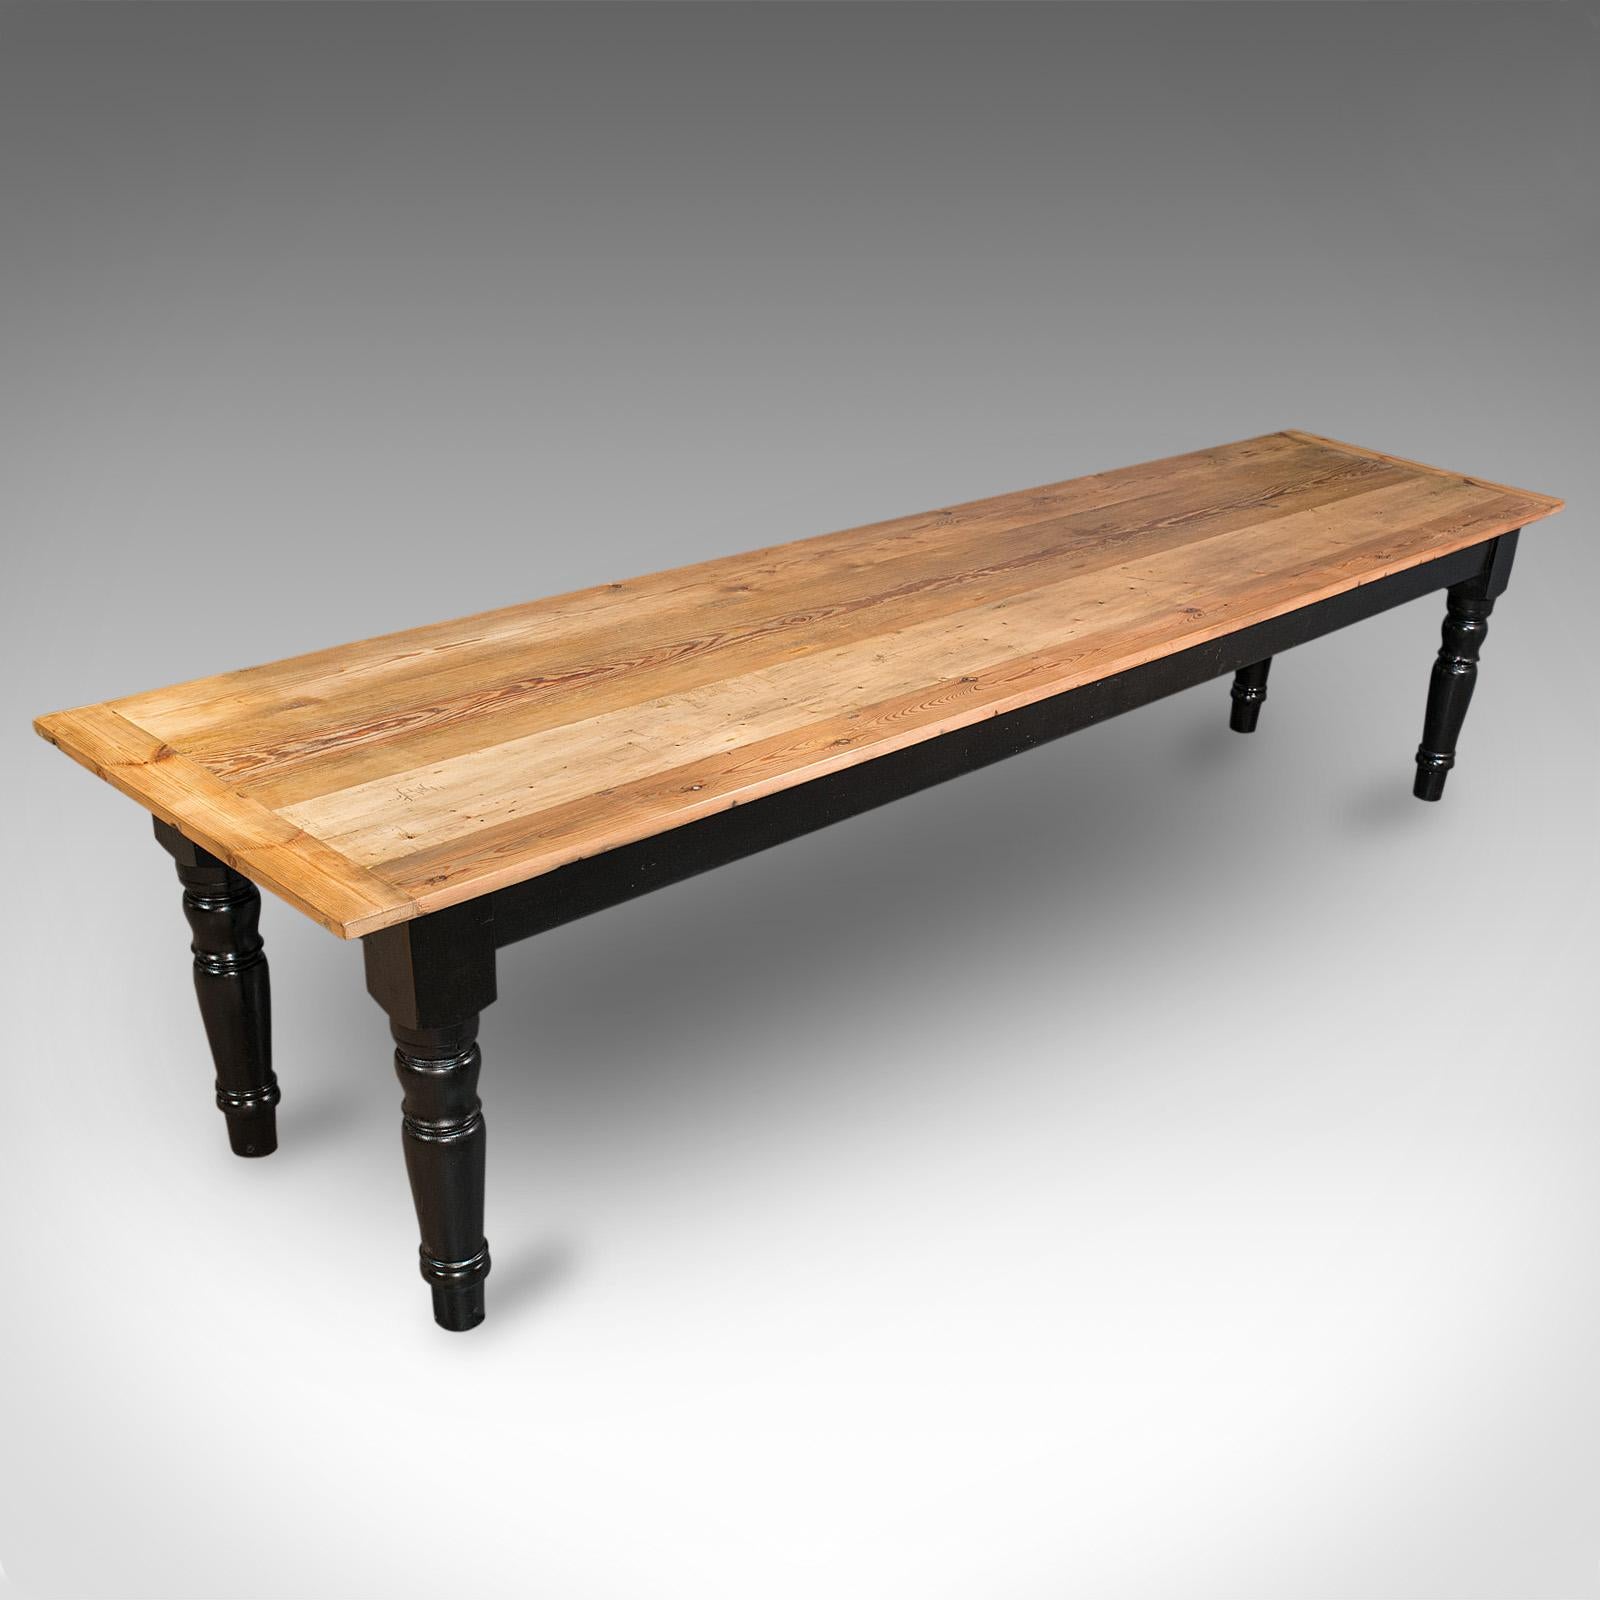 Large Antique Farmhouse Dining Table, English, Pine, Kitchen, Victorian, C.1900 1